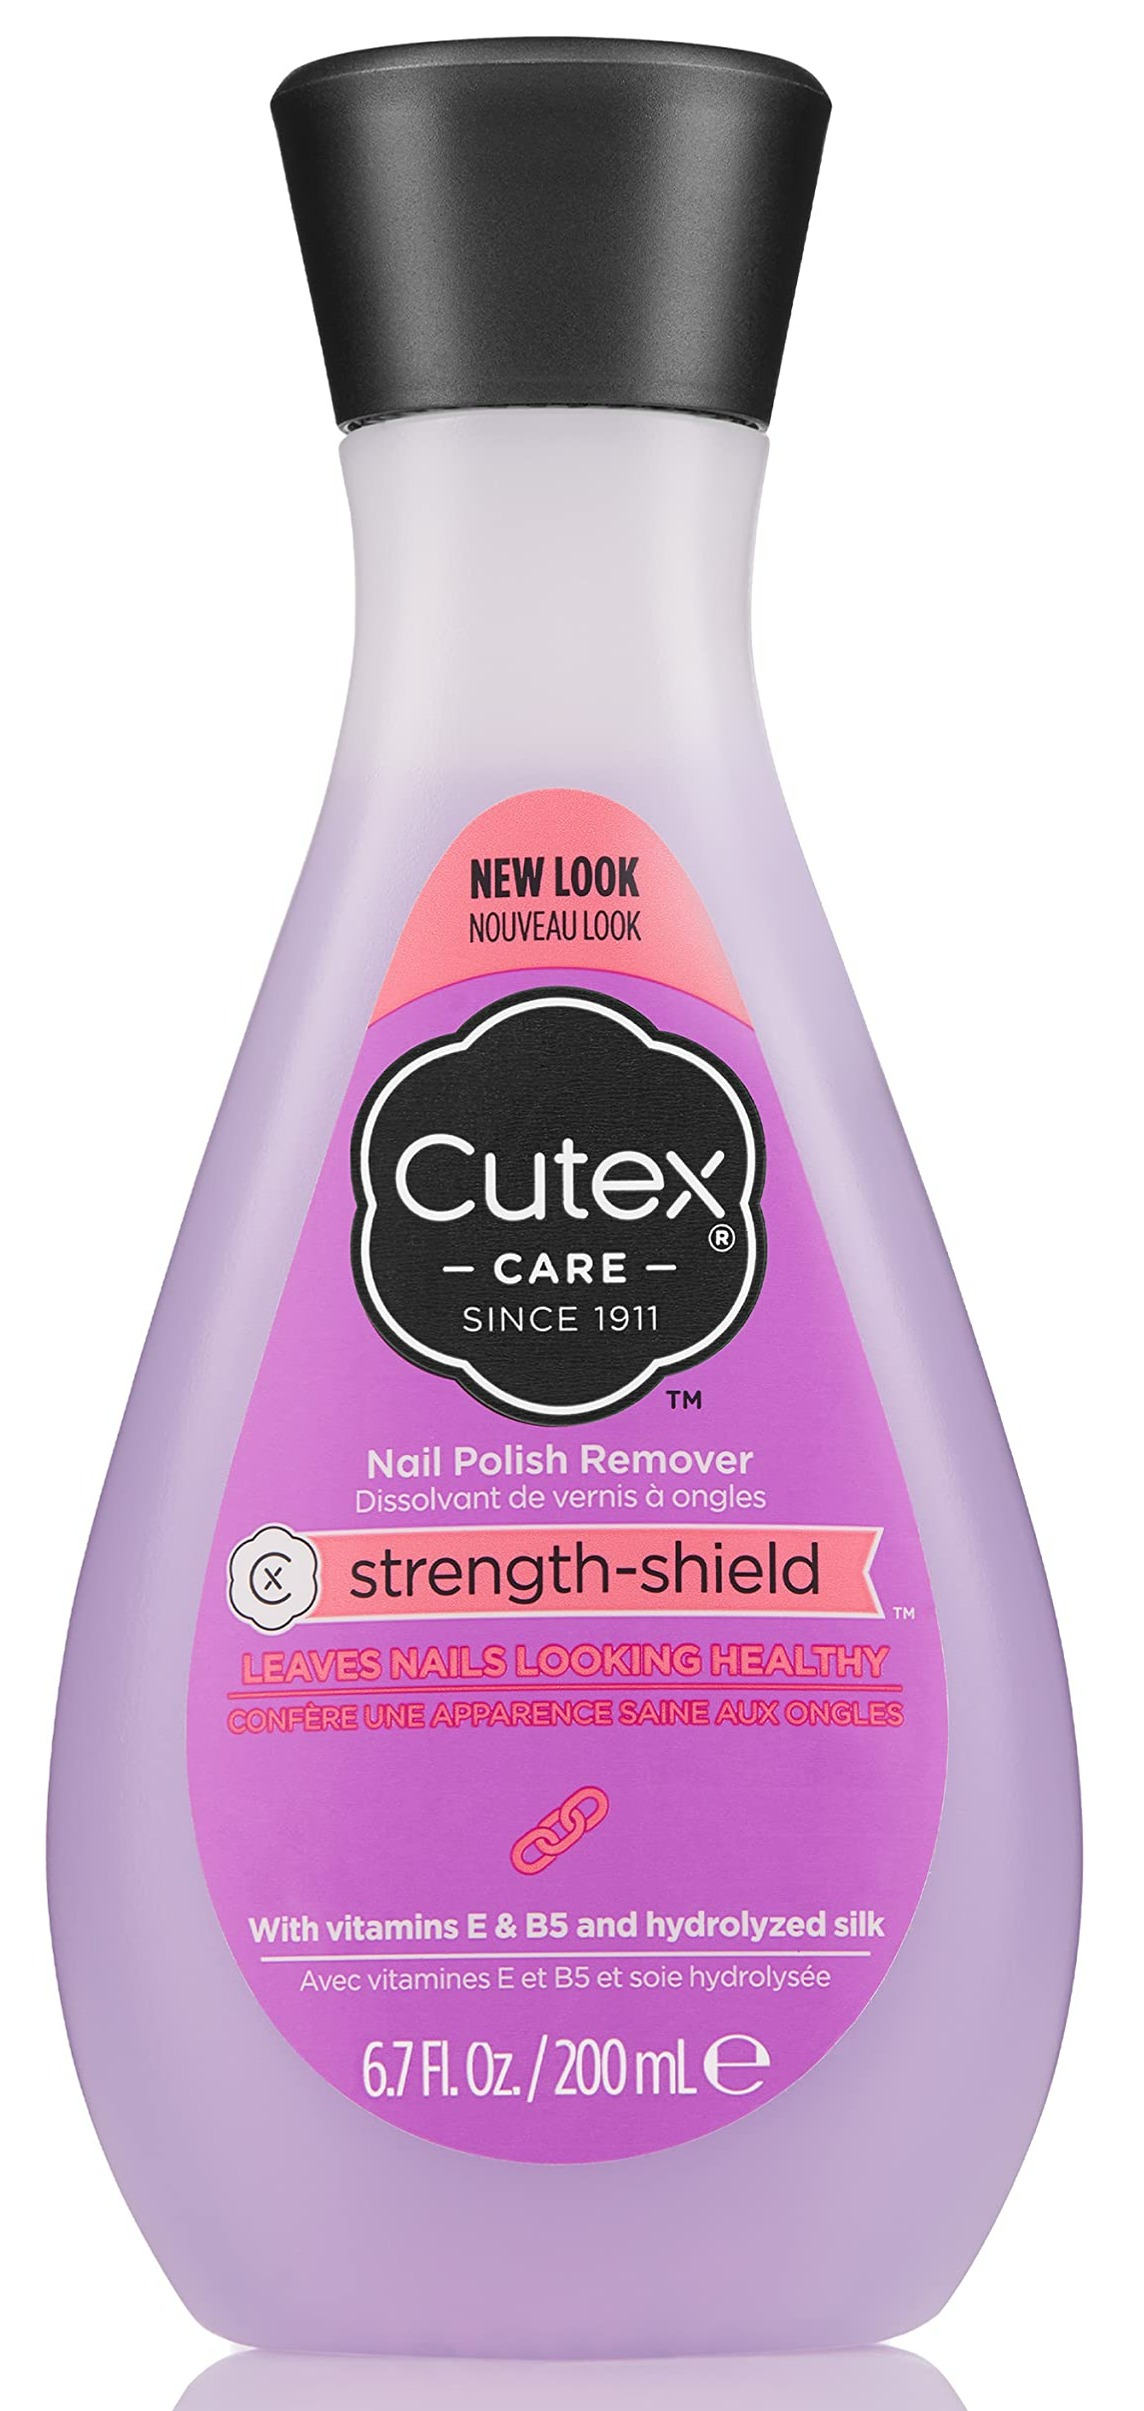 Cutex Nail Polish Remover, Strength Shield, Leaves Nails Looking Healthy, Contains Vitamins E, B5 & Hydrolyzed Silk, 6.76 Fl Oz $1.50 S&S with 25% off Clipped Q AMAZON